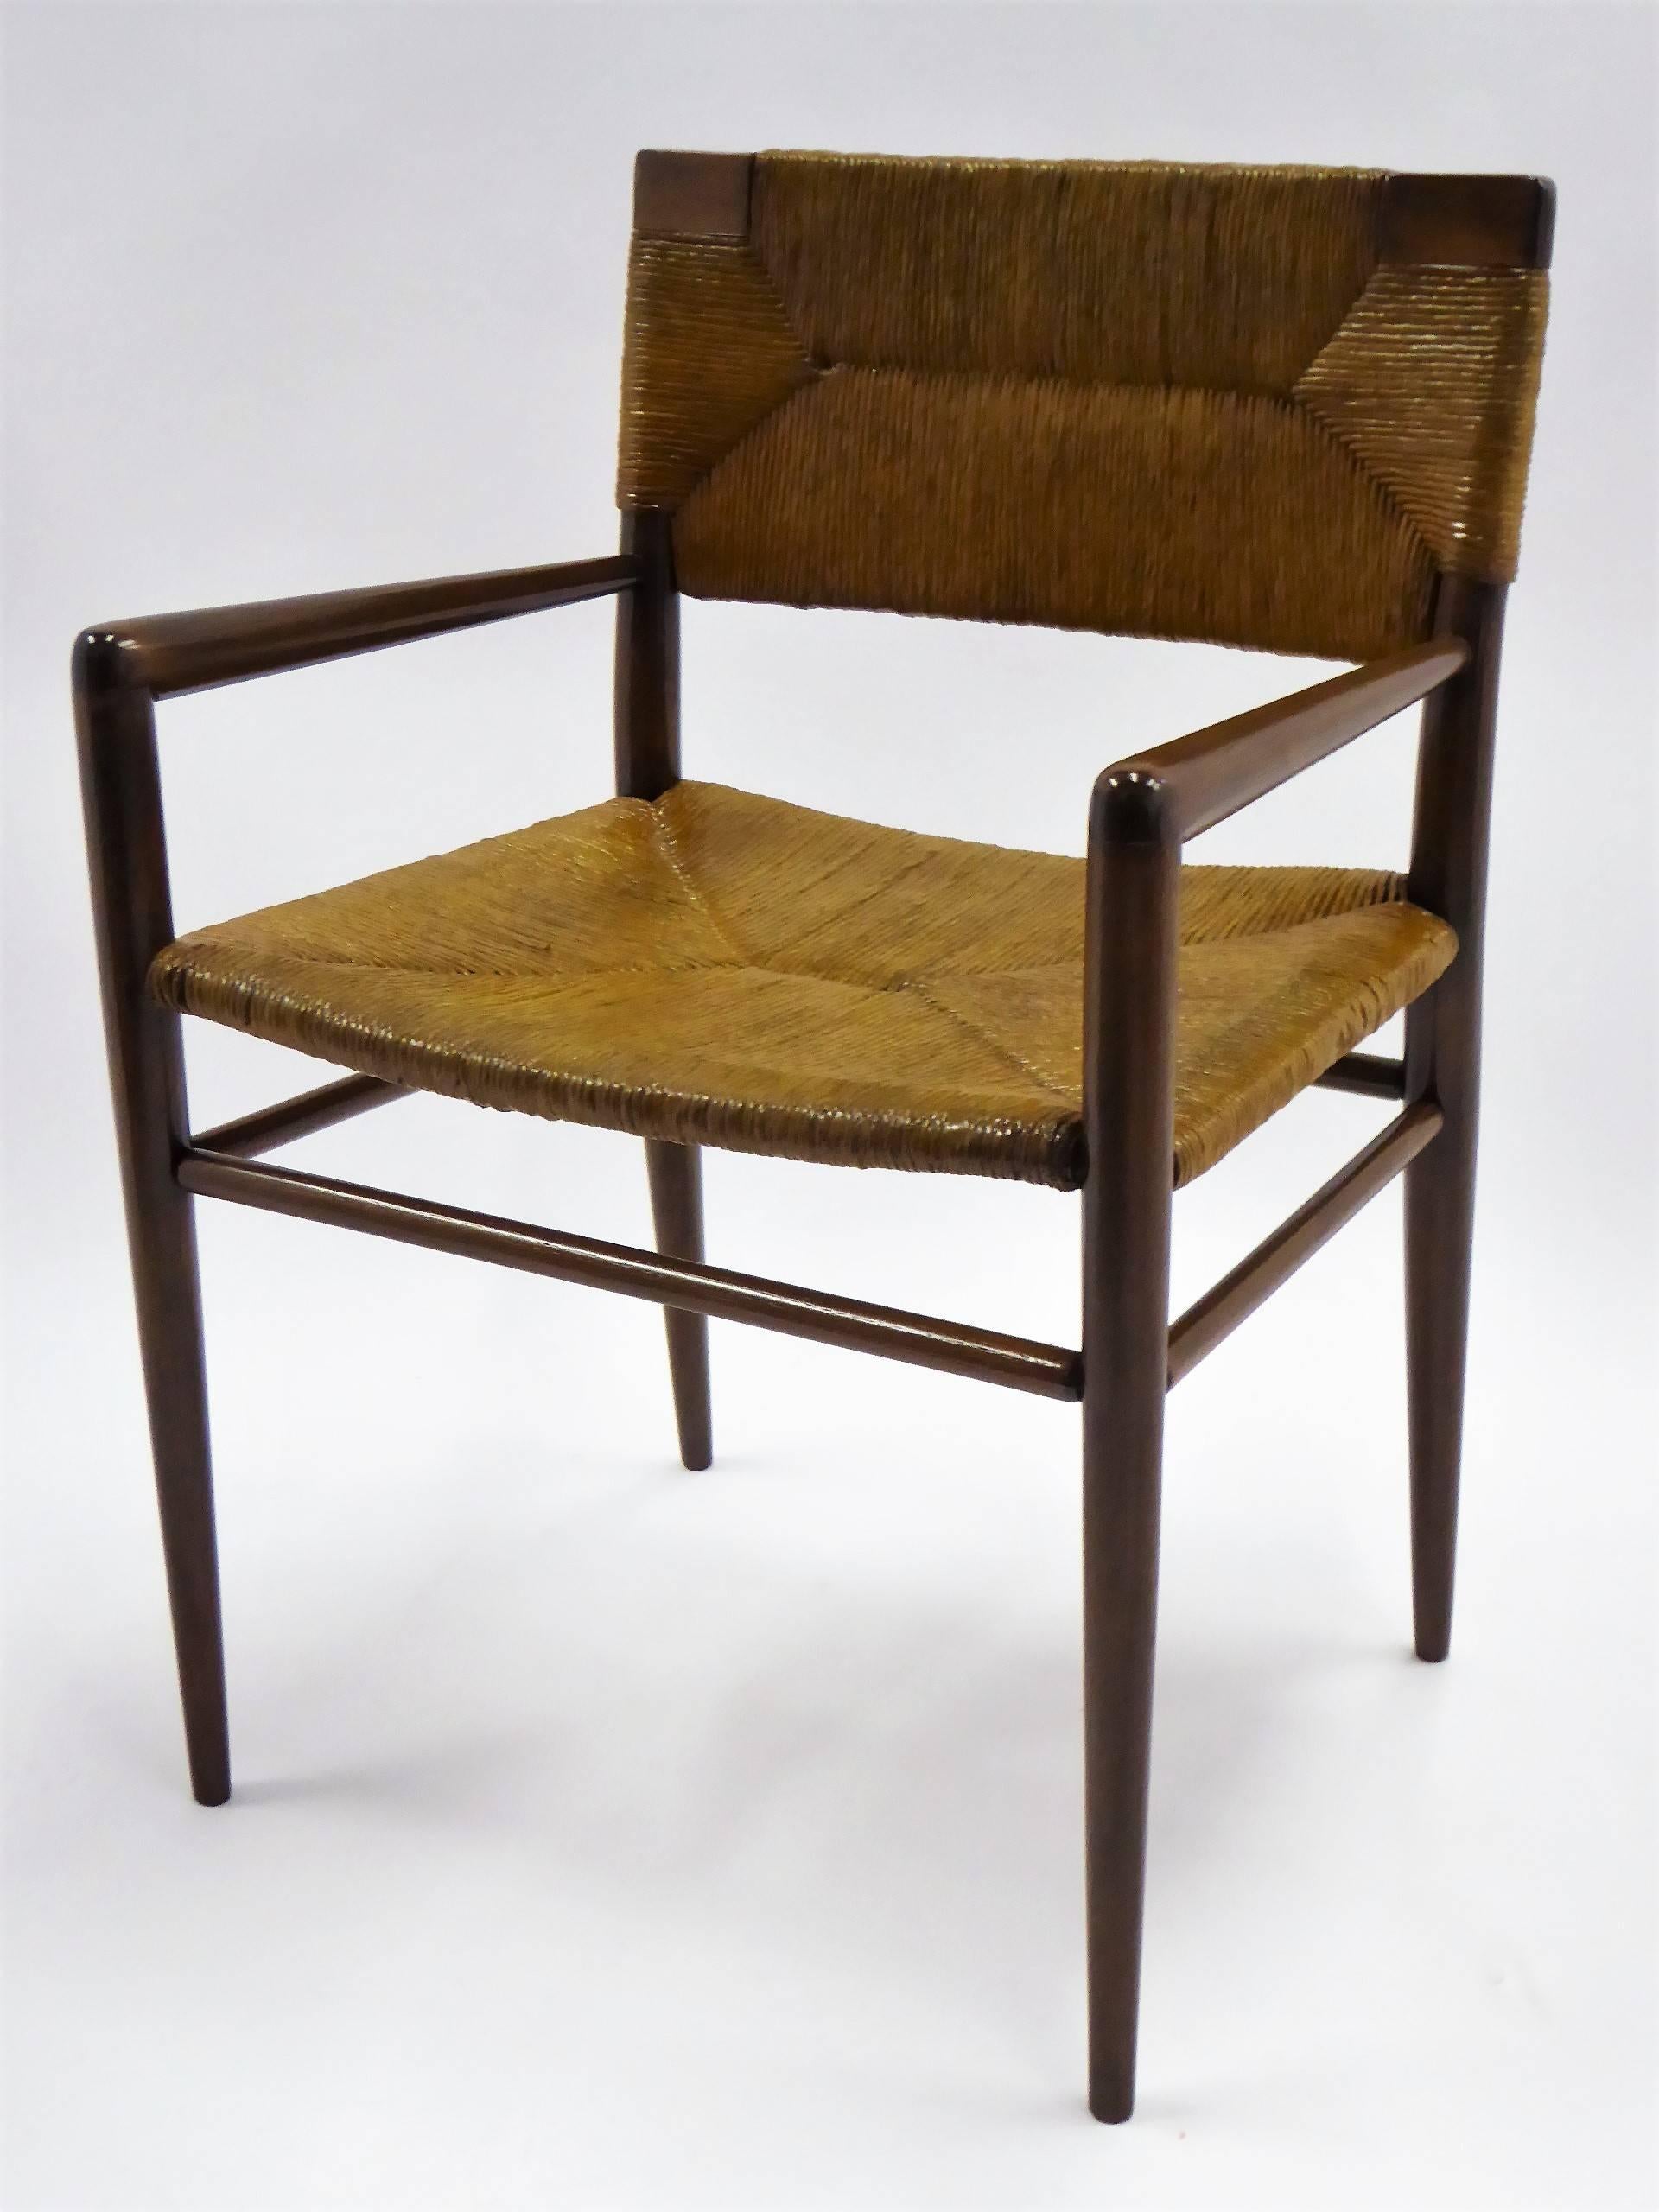 Designed in 1956 by Mel Smilow, this armchair in walnut with a woven rush seat and back. In restored condition, a midcentury Classic with beautiful sculpted lines. A wonderful Scandinavian modern side chair or lounge chair.
Measurements: 22 inches